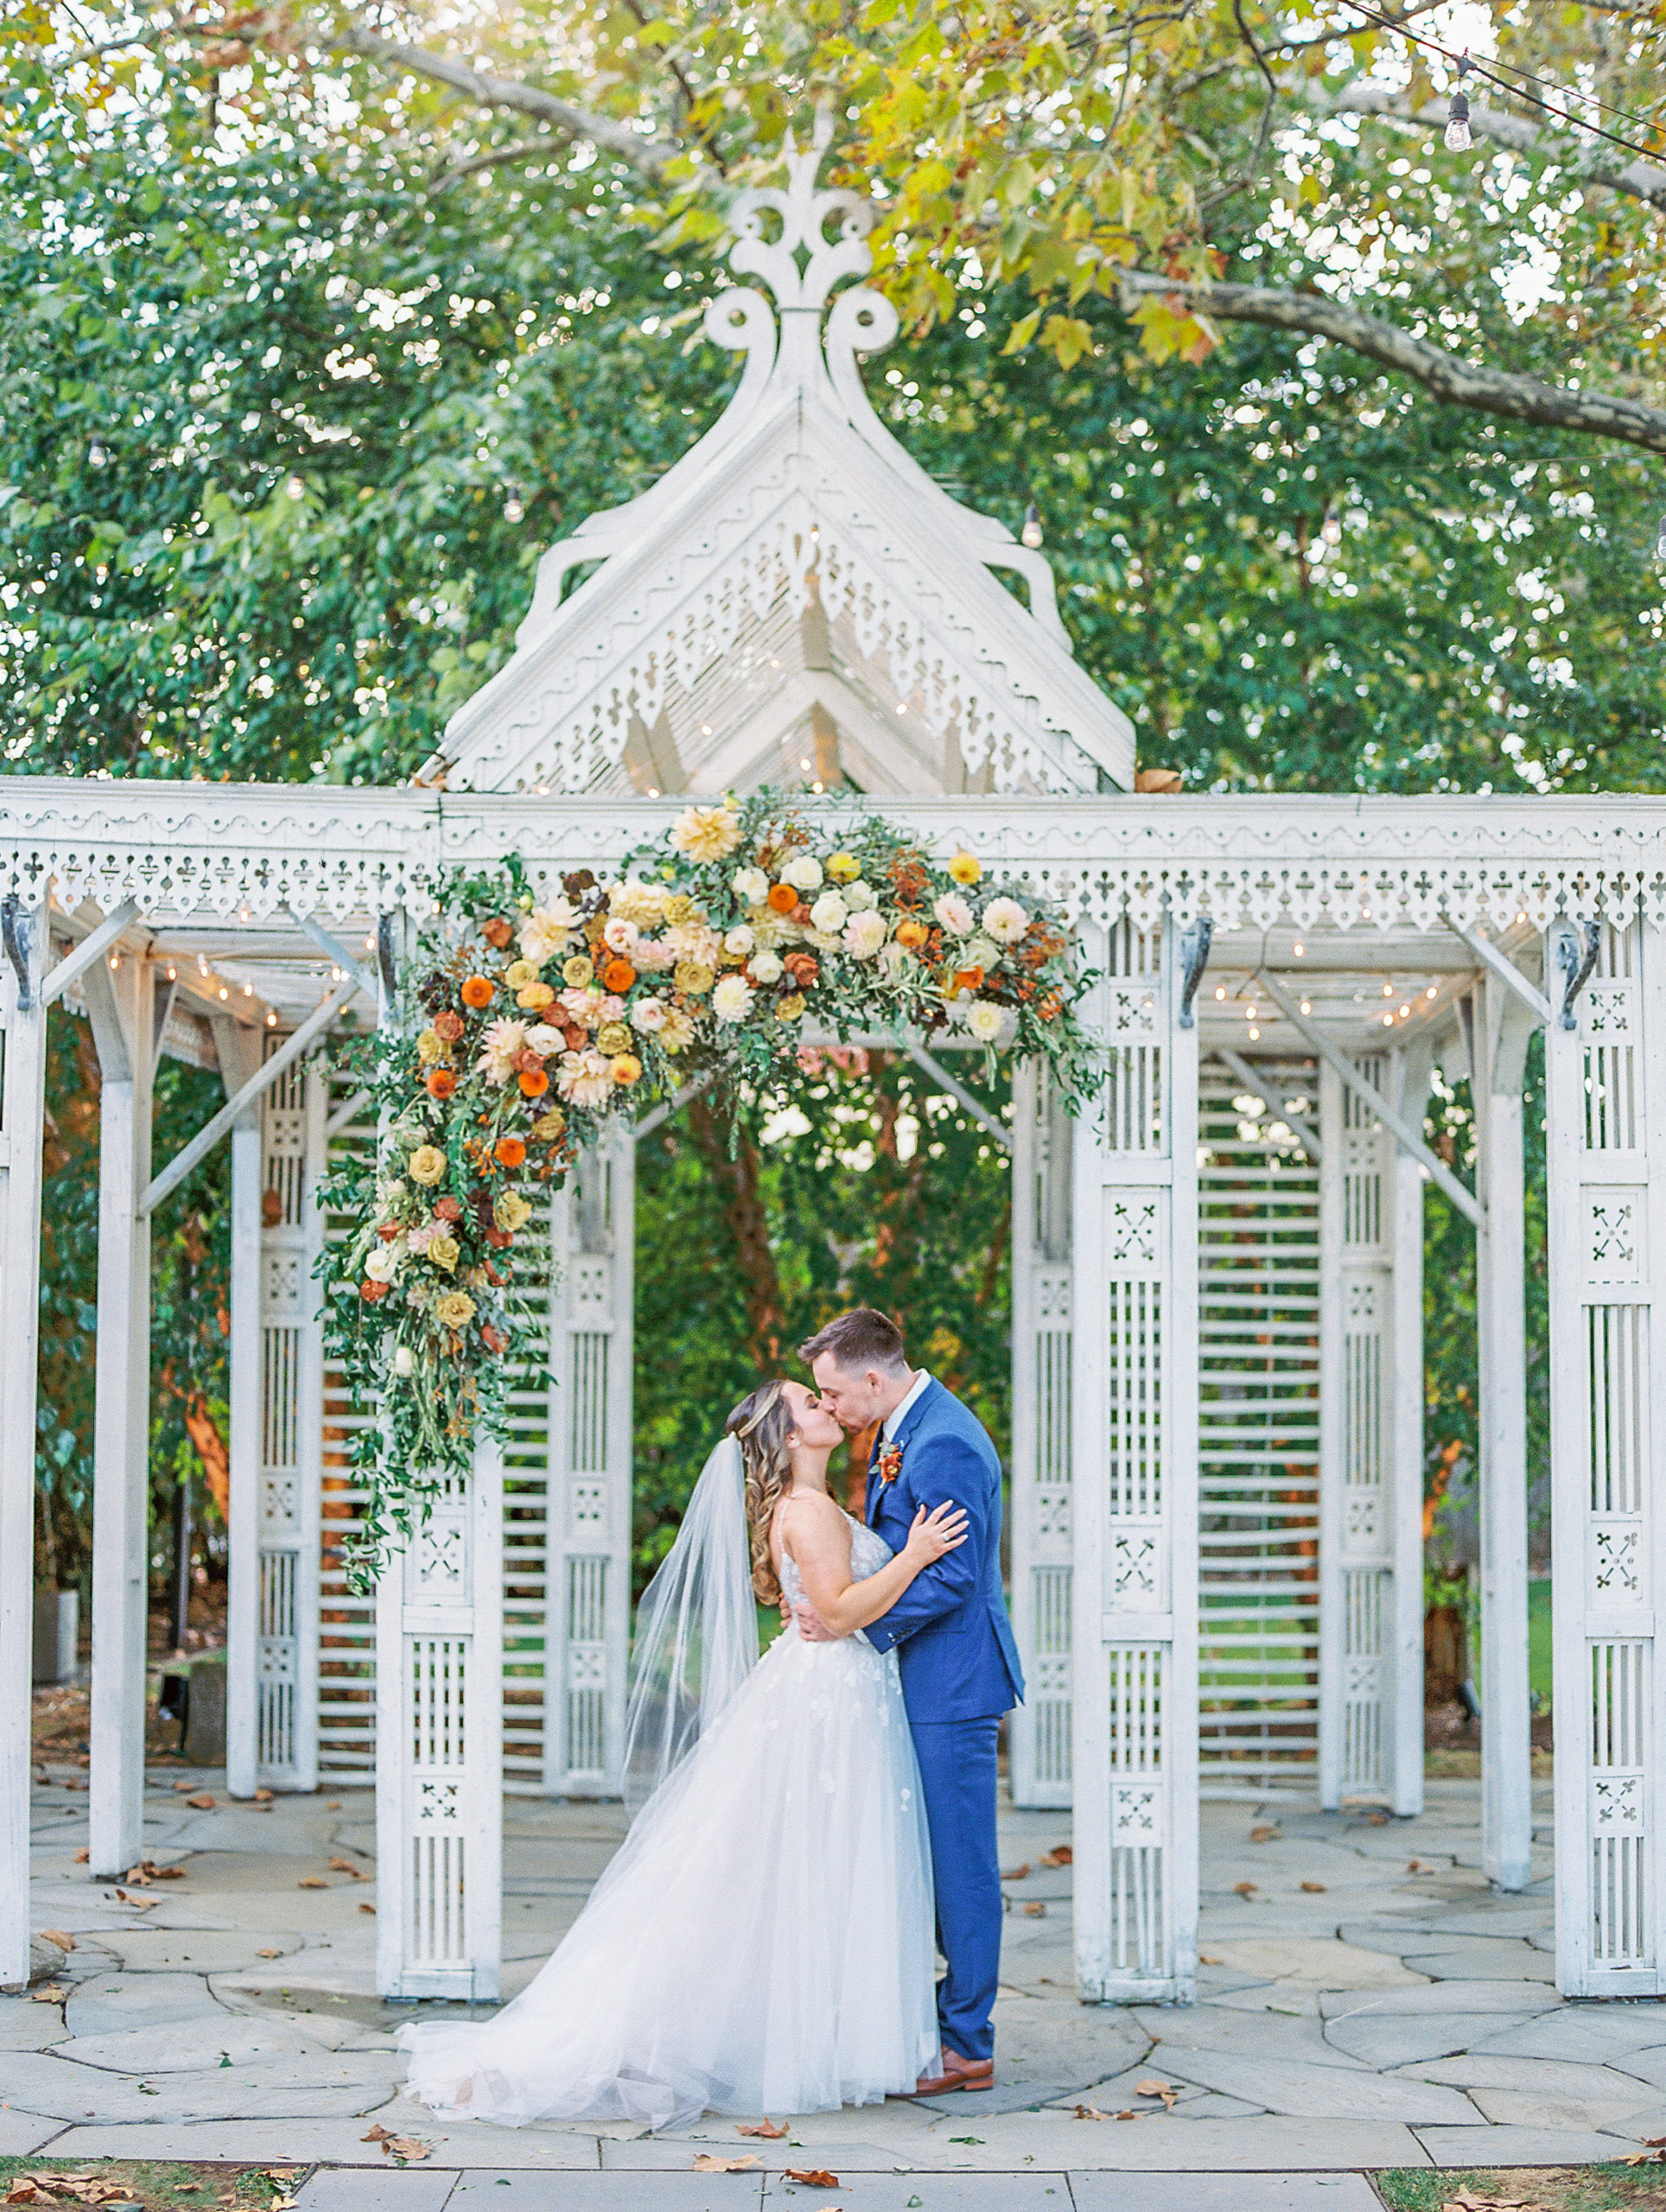 Bride and groom embrace and kiss in front of white pavilion with beautiful arrangement of autumnal colored flowers above 